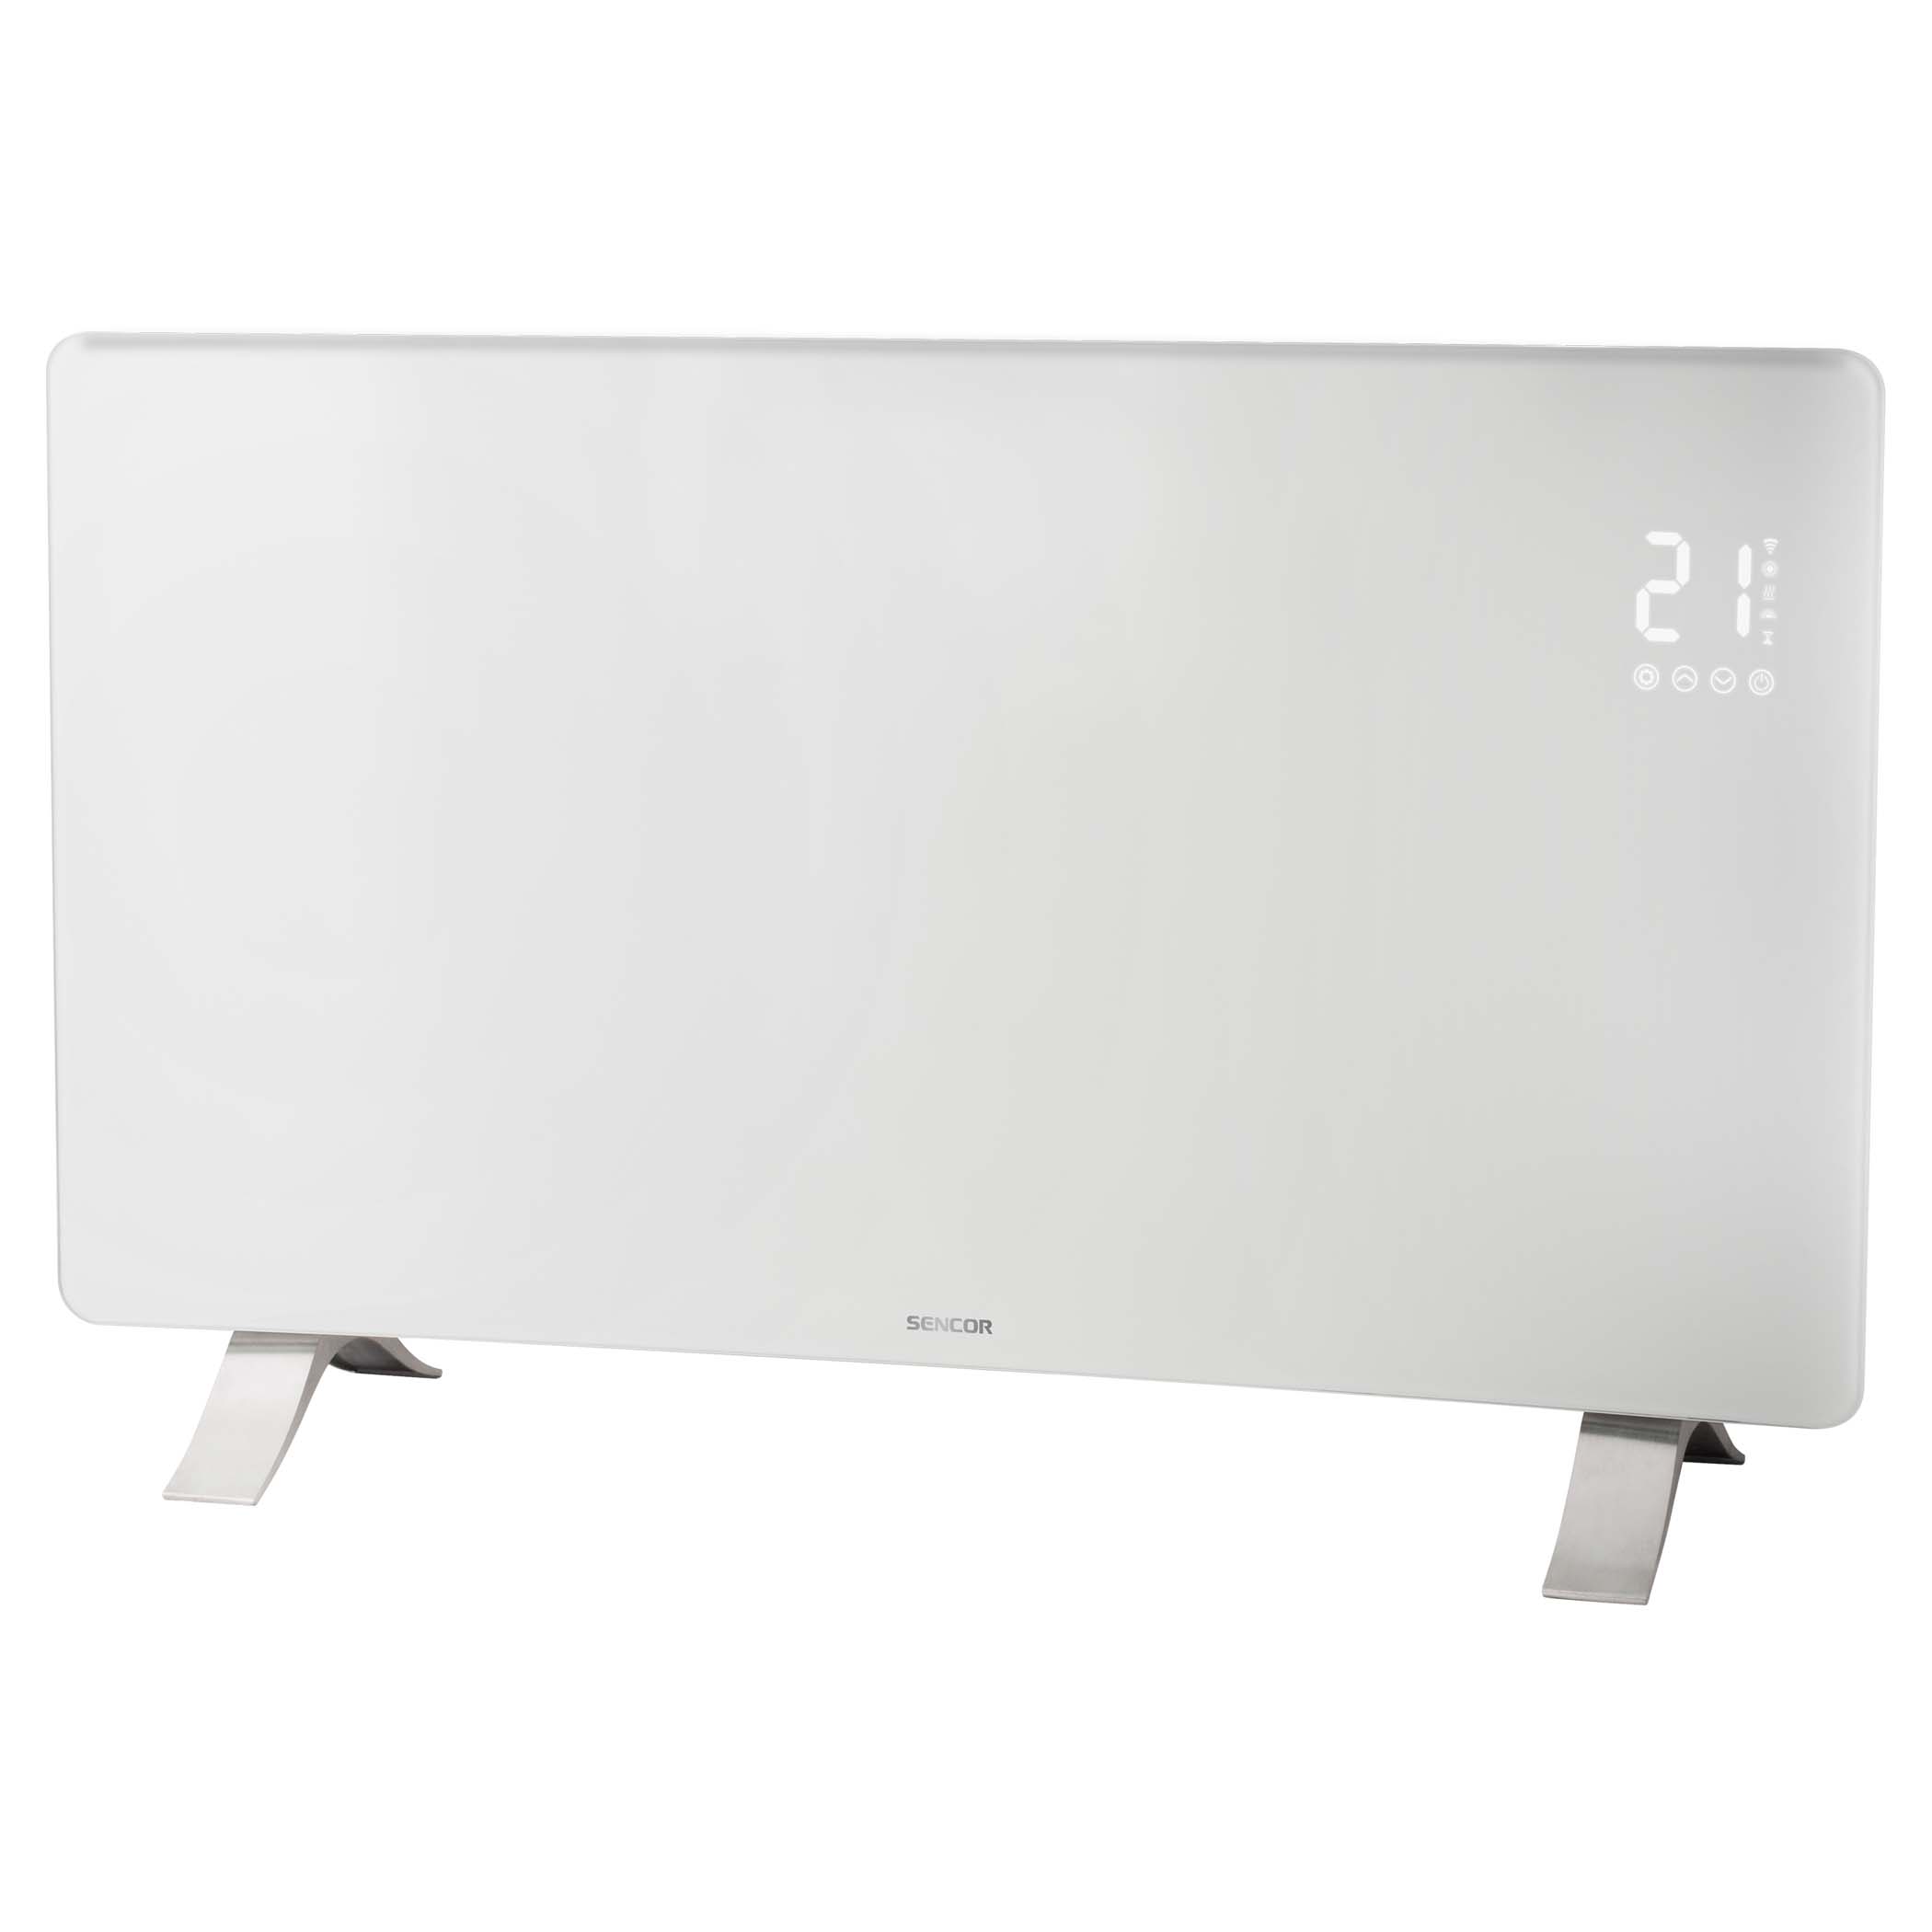 Electric convector panel heater installation 